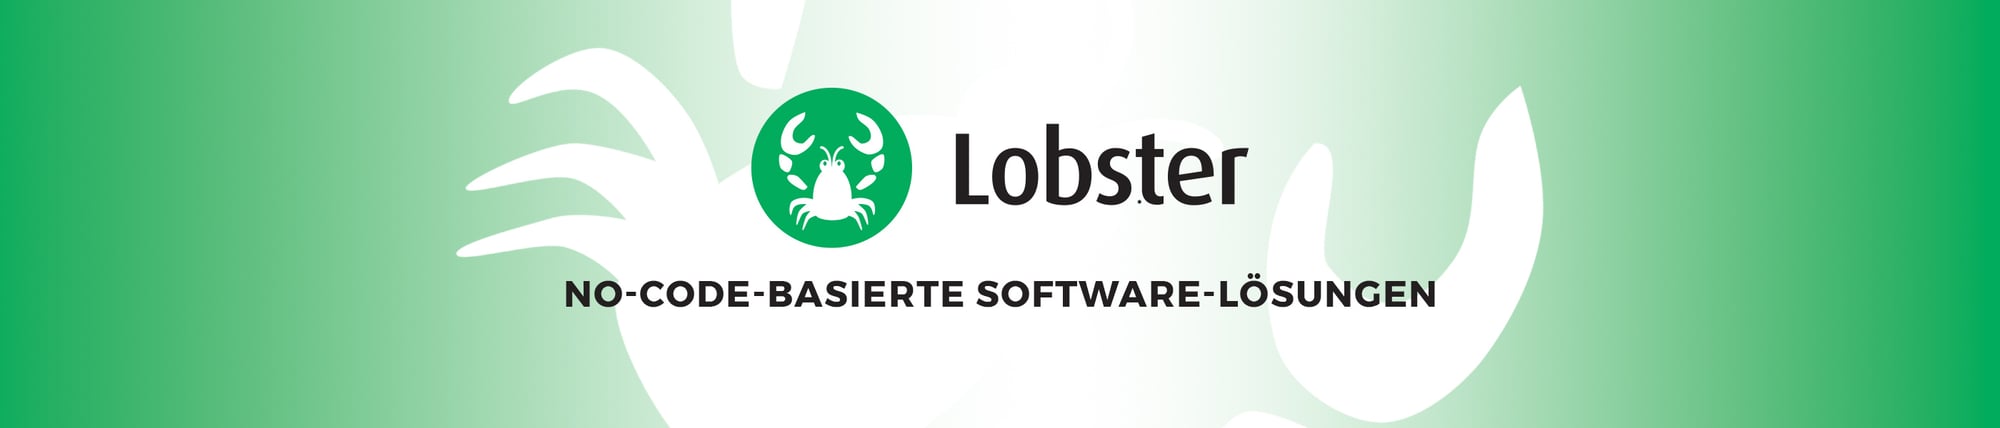 Lobster Support and Consultancy- W4 Agentur